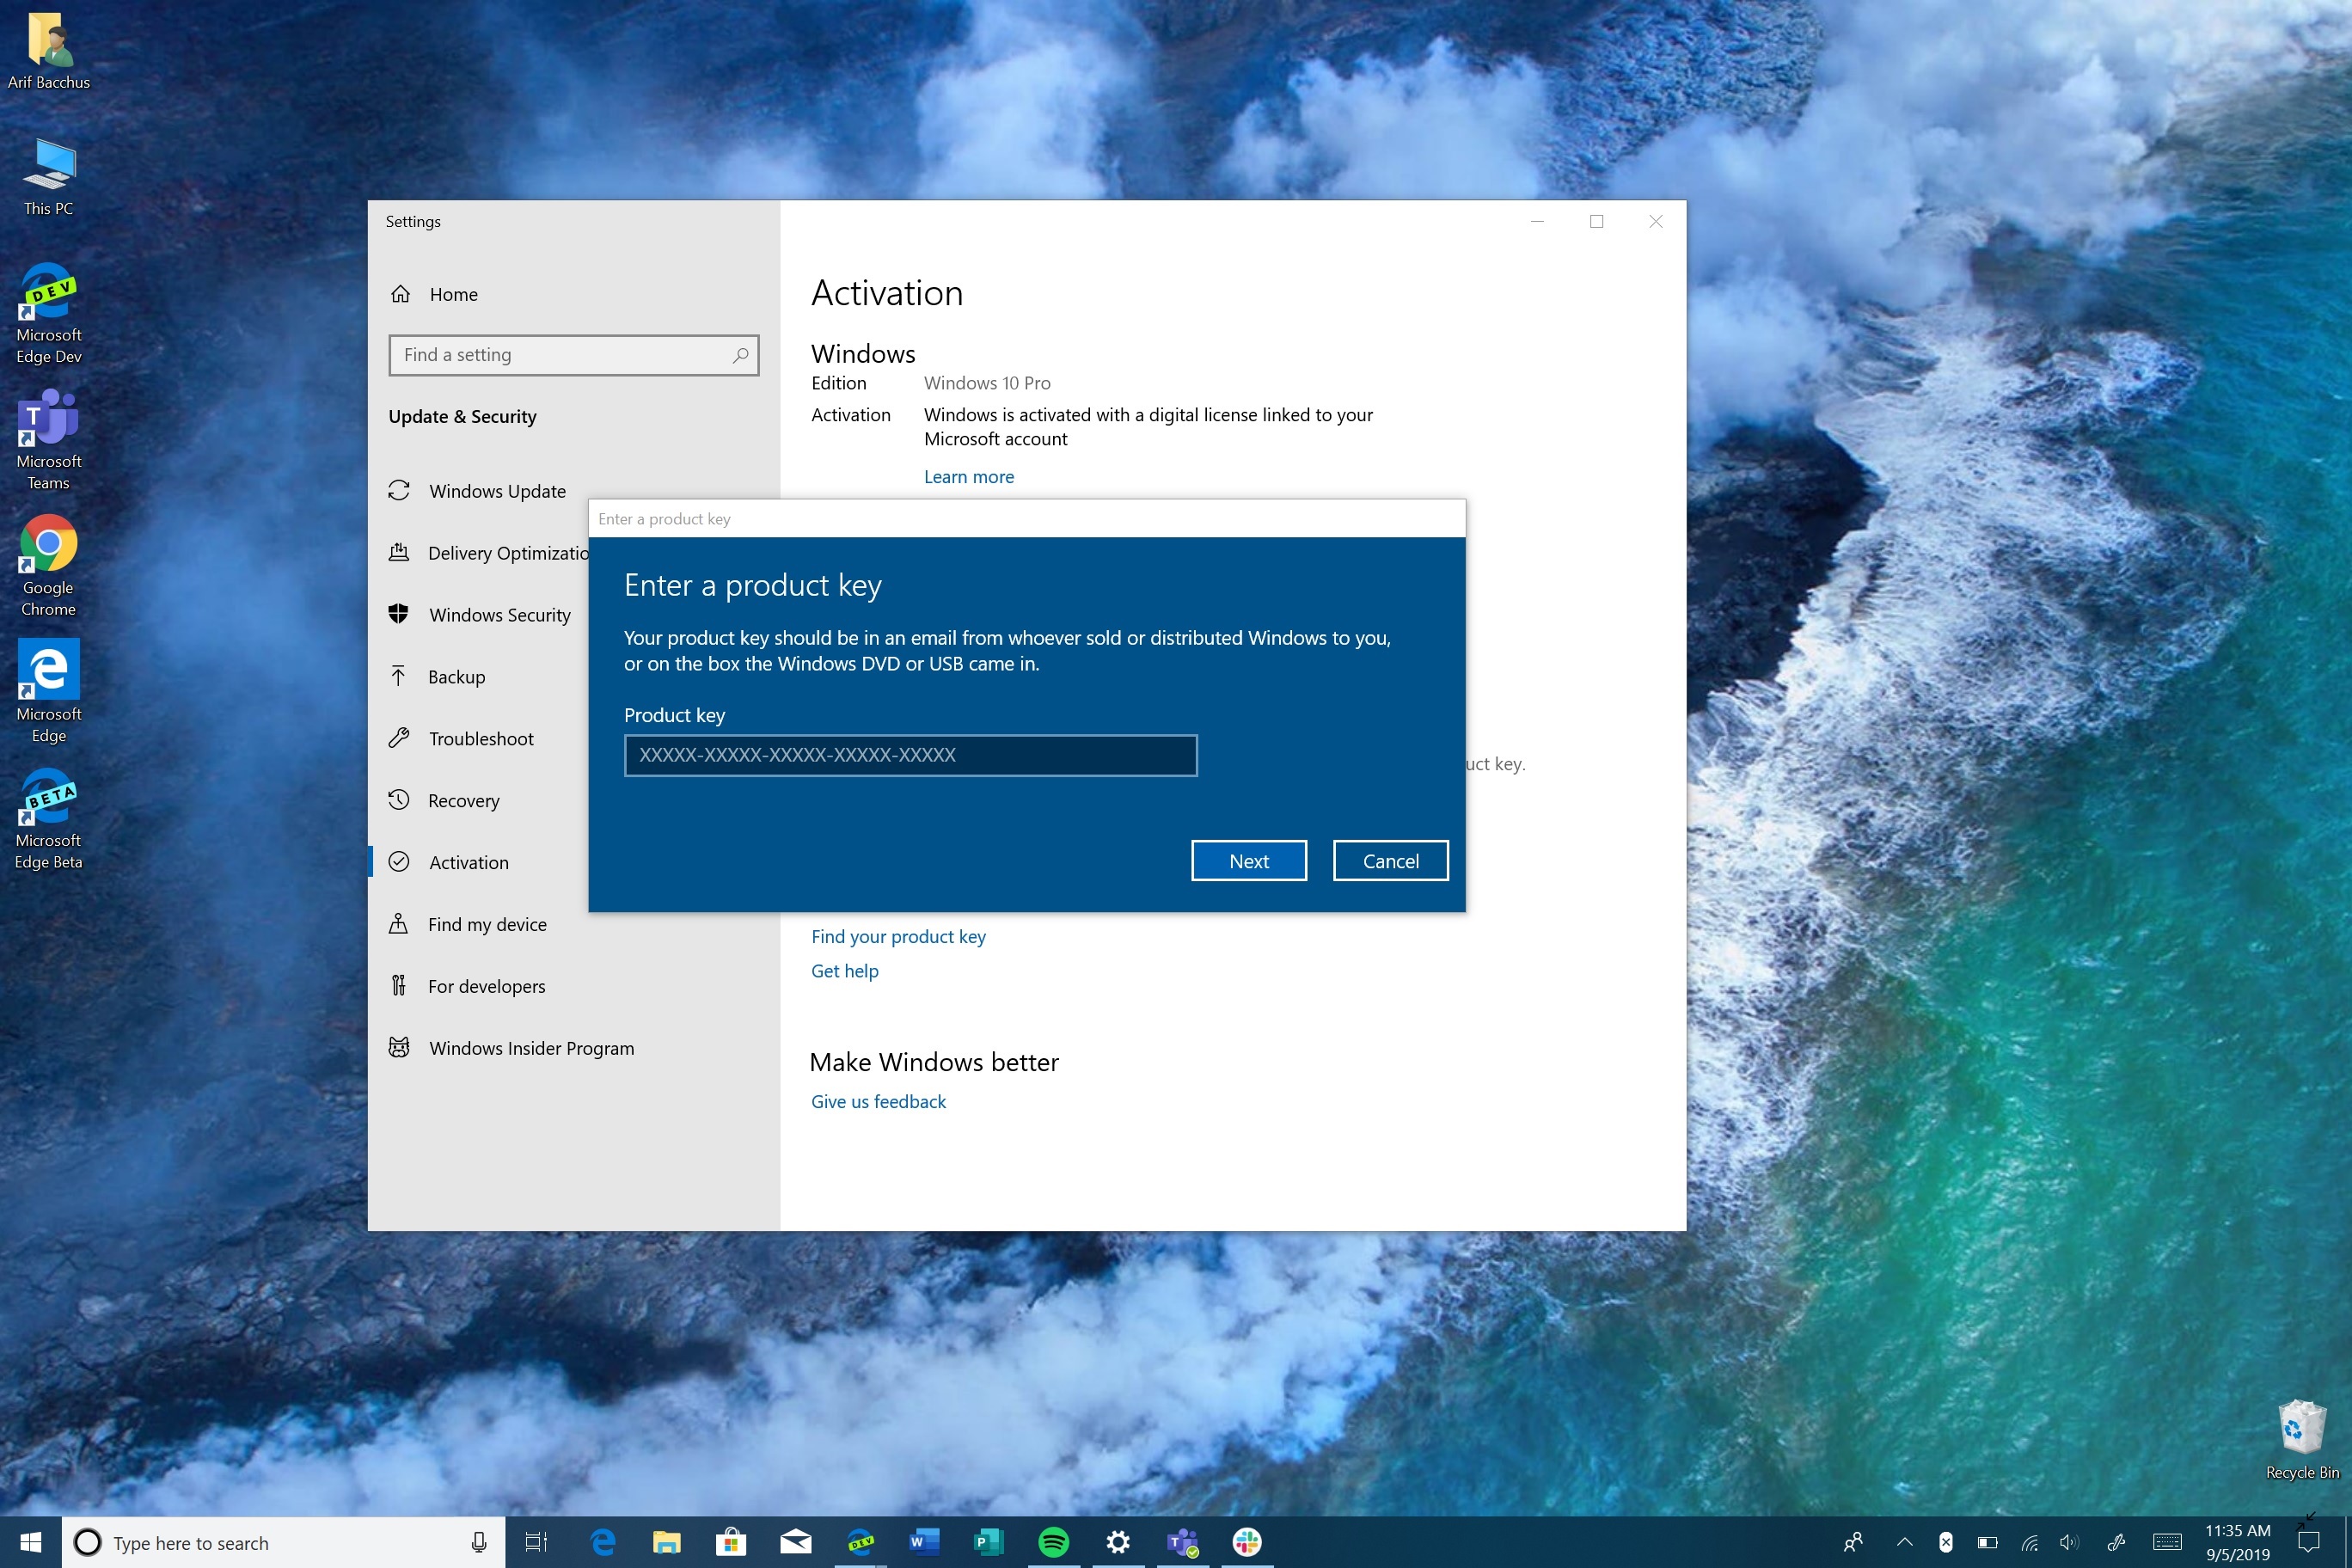  How to download Windows 10 for free